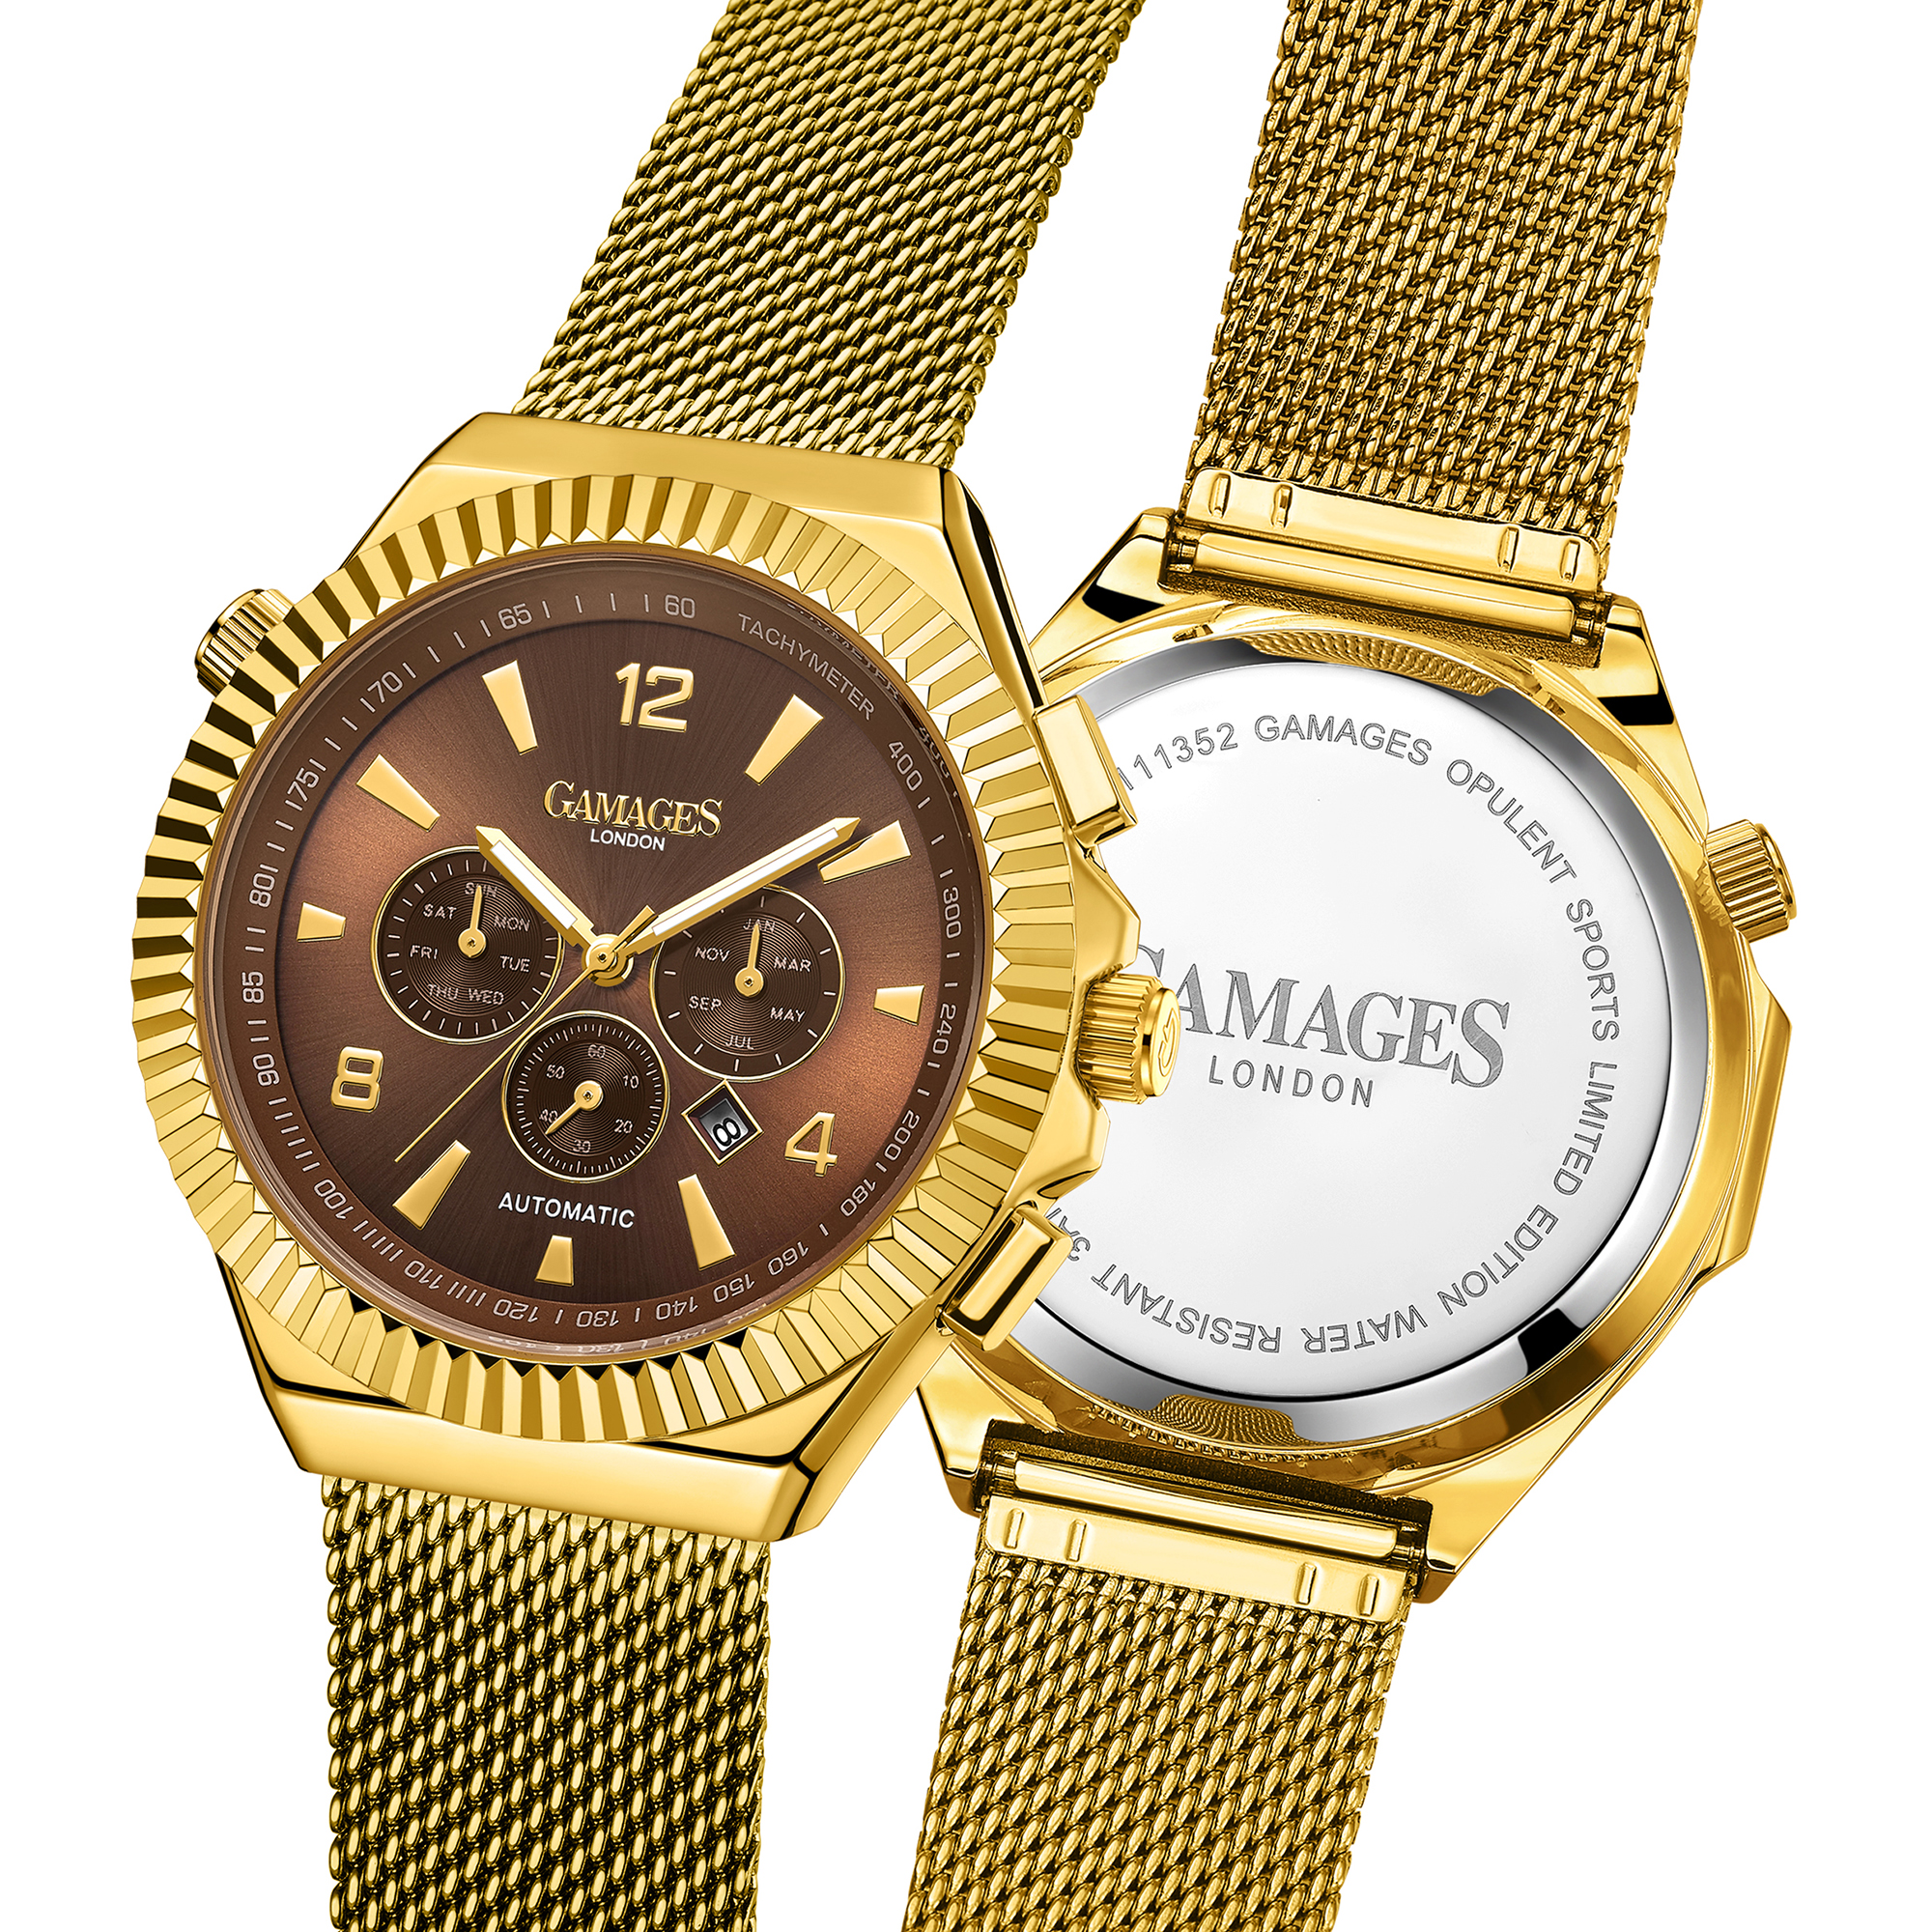 Ltd Edition Hand Assembled Gamages Opulent Sports Automatic Gold – 5 Year Warranty & Free Delivery - Image 4 of 6